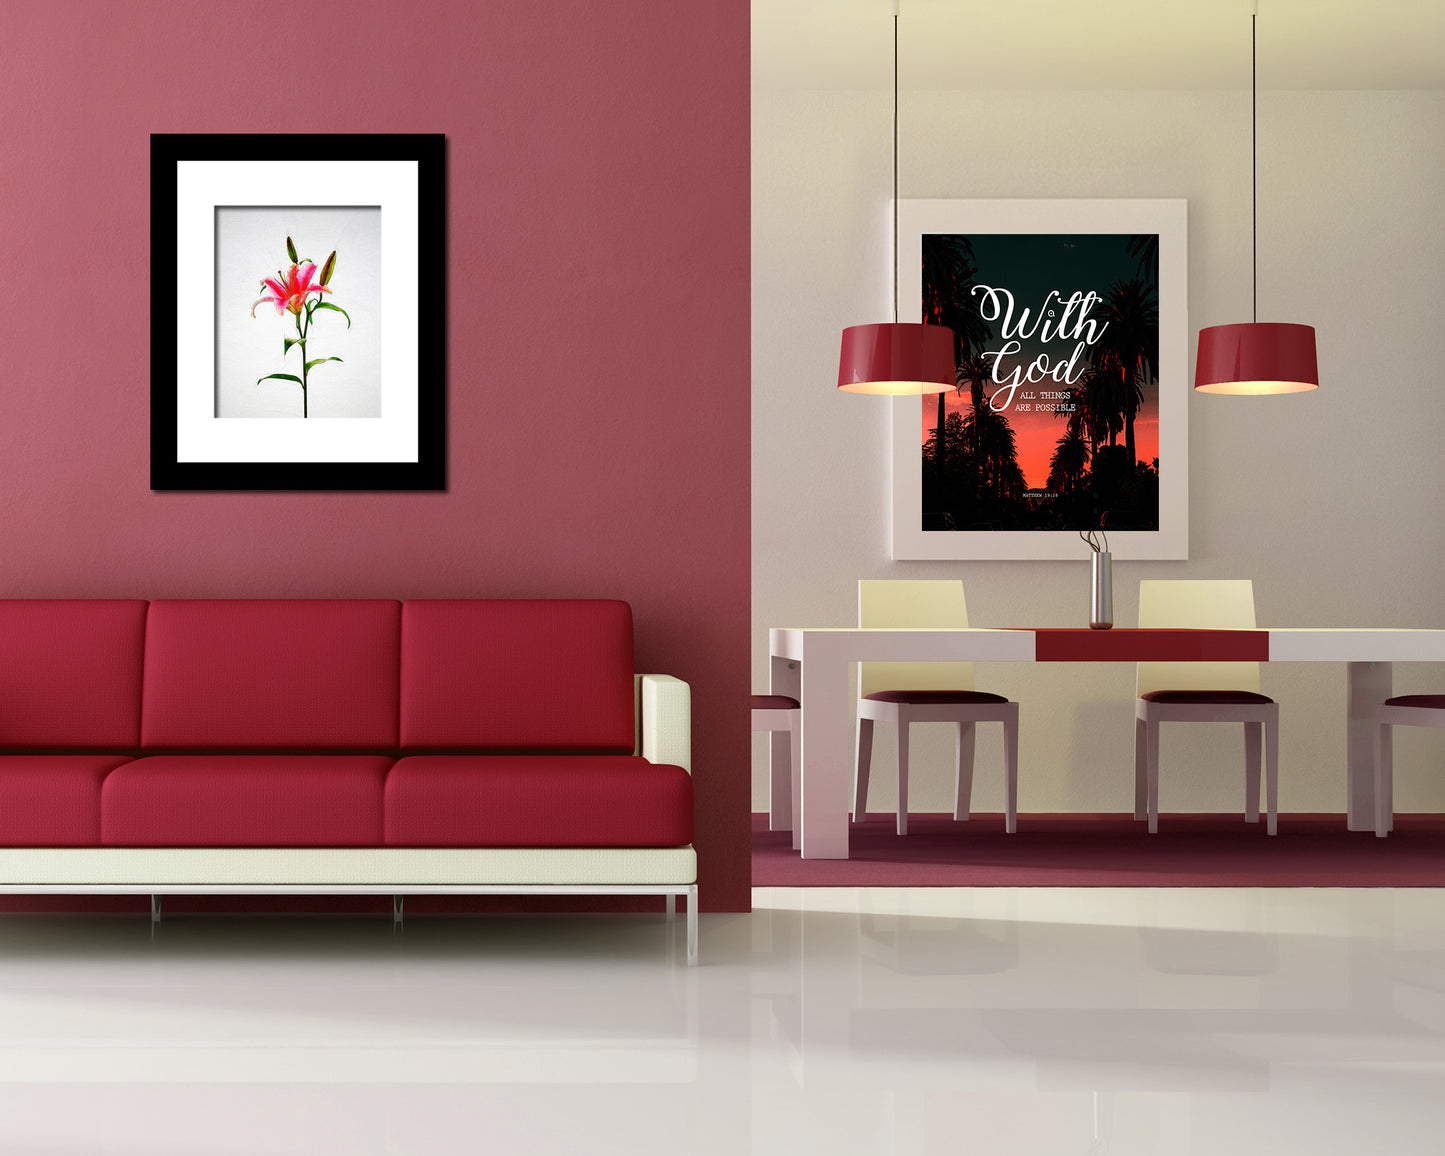 Pink Lily Sketch Plants Art Wood Framed Print Wall Decor Gifts